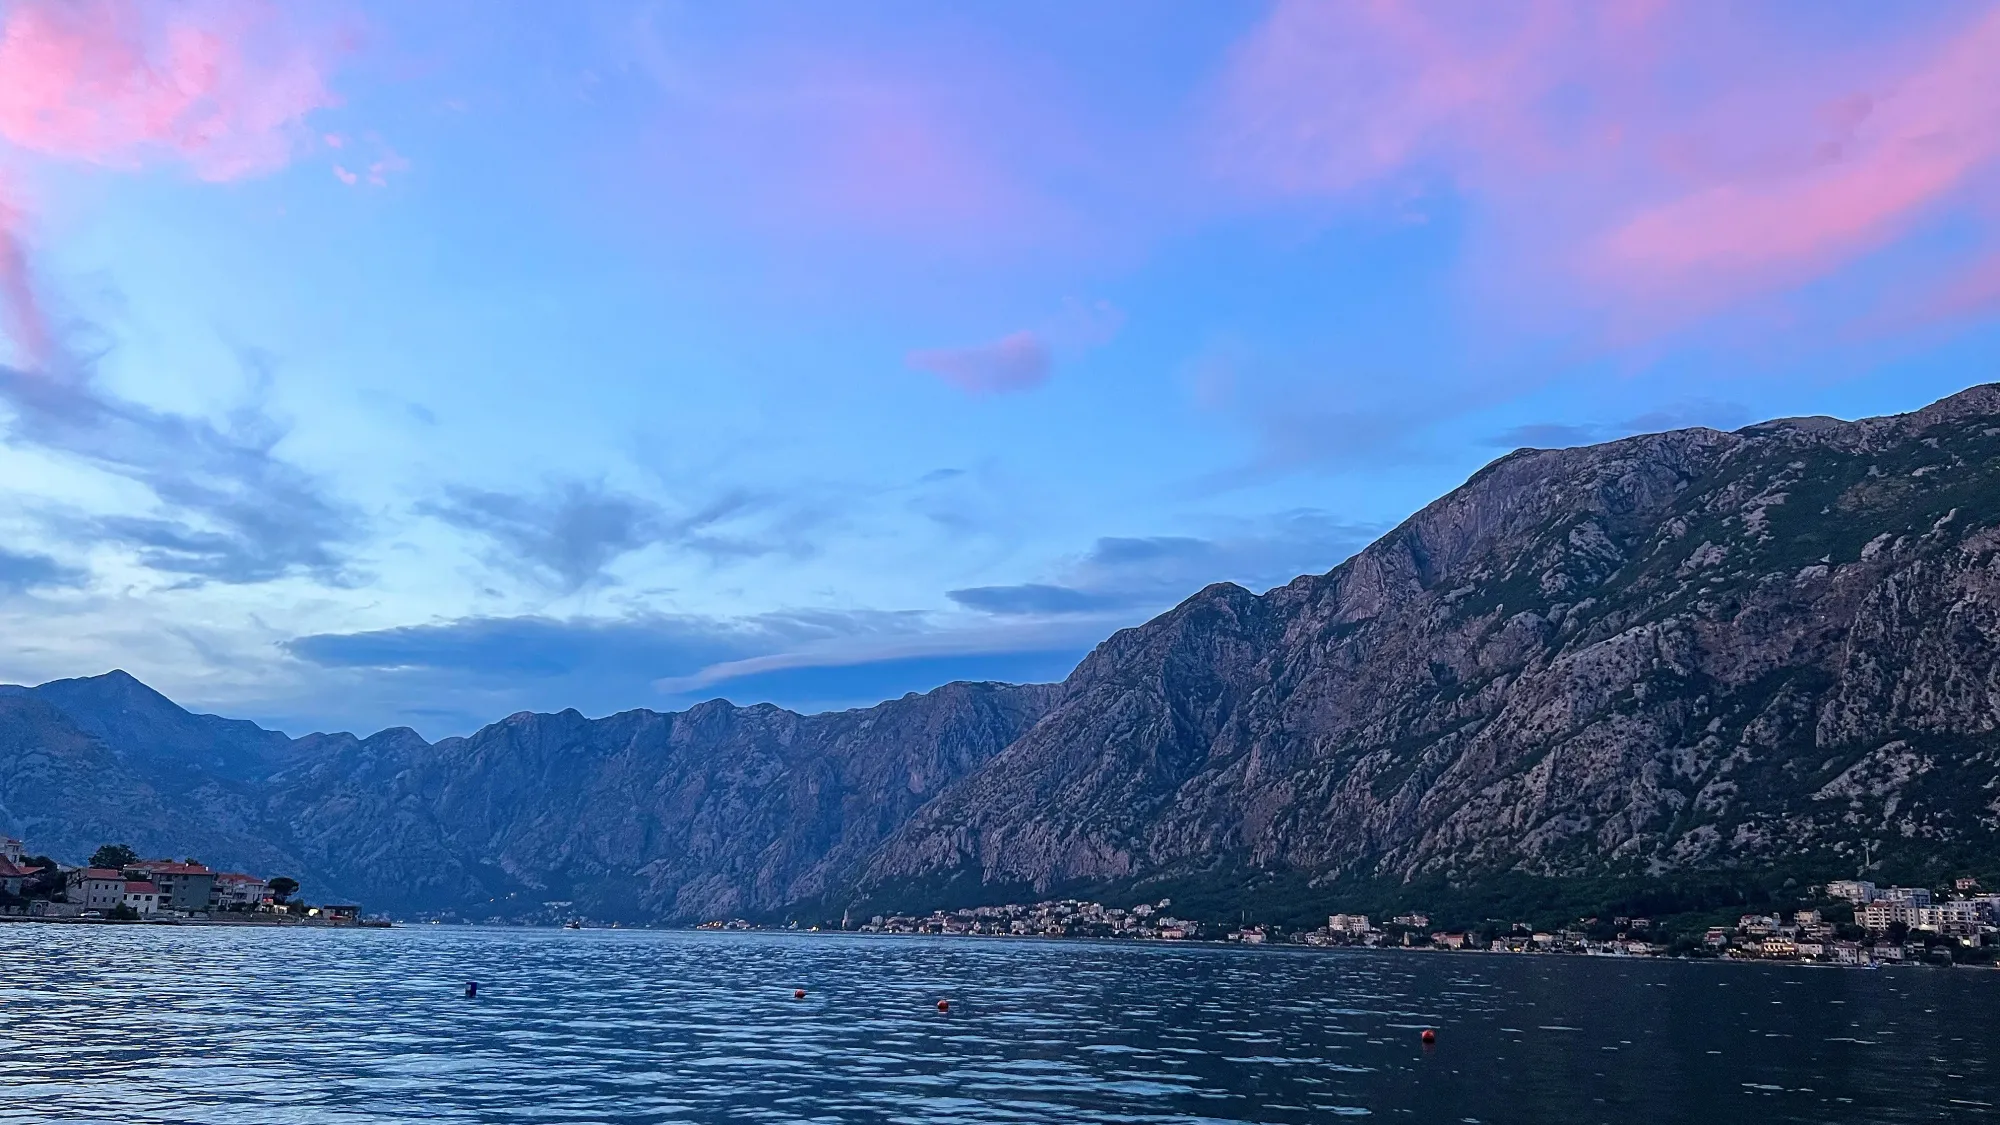 Kotor Bay in the evening with blue skies and pink clouds